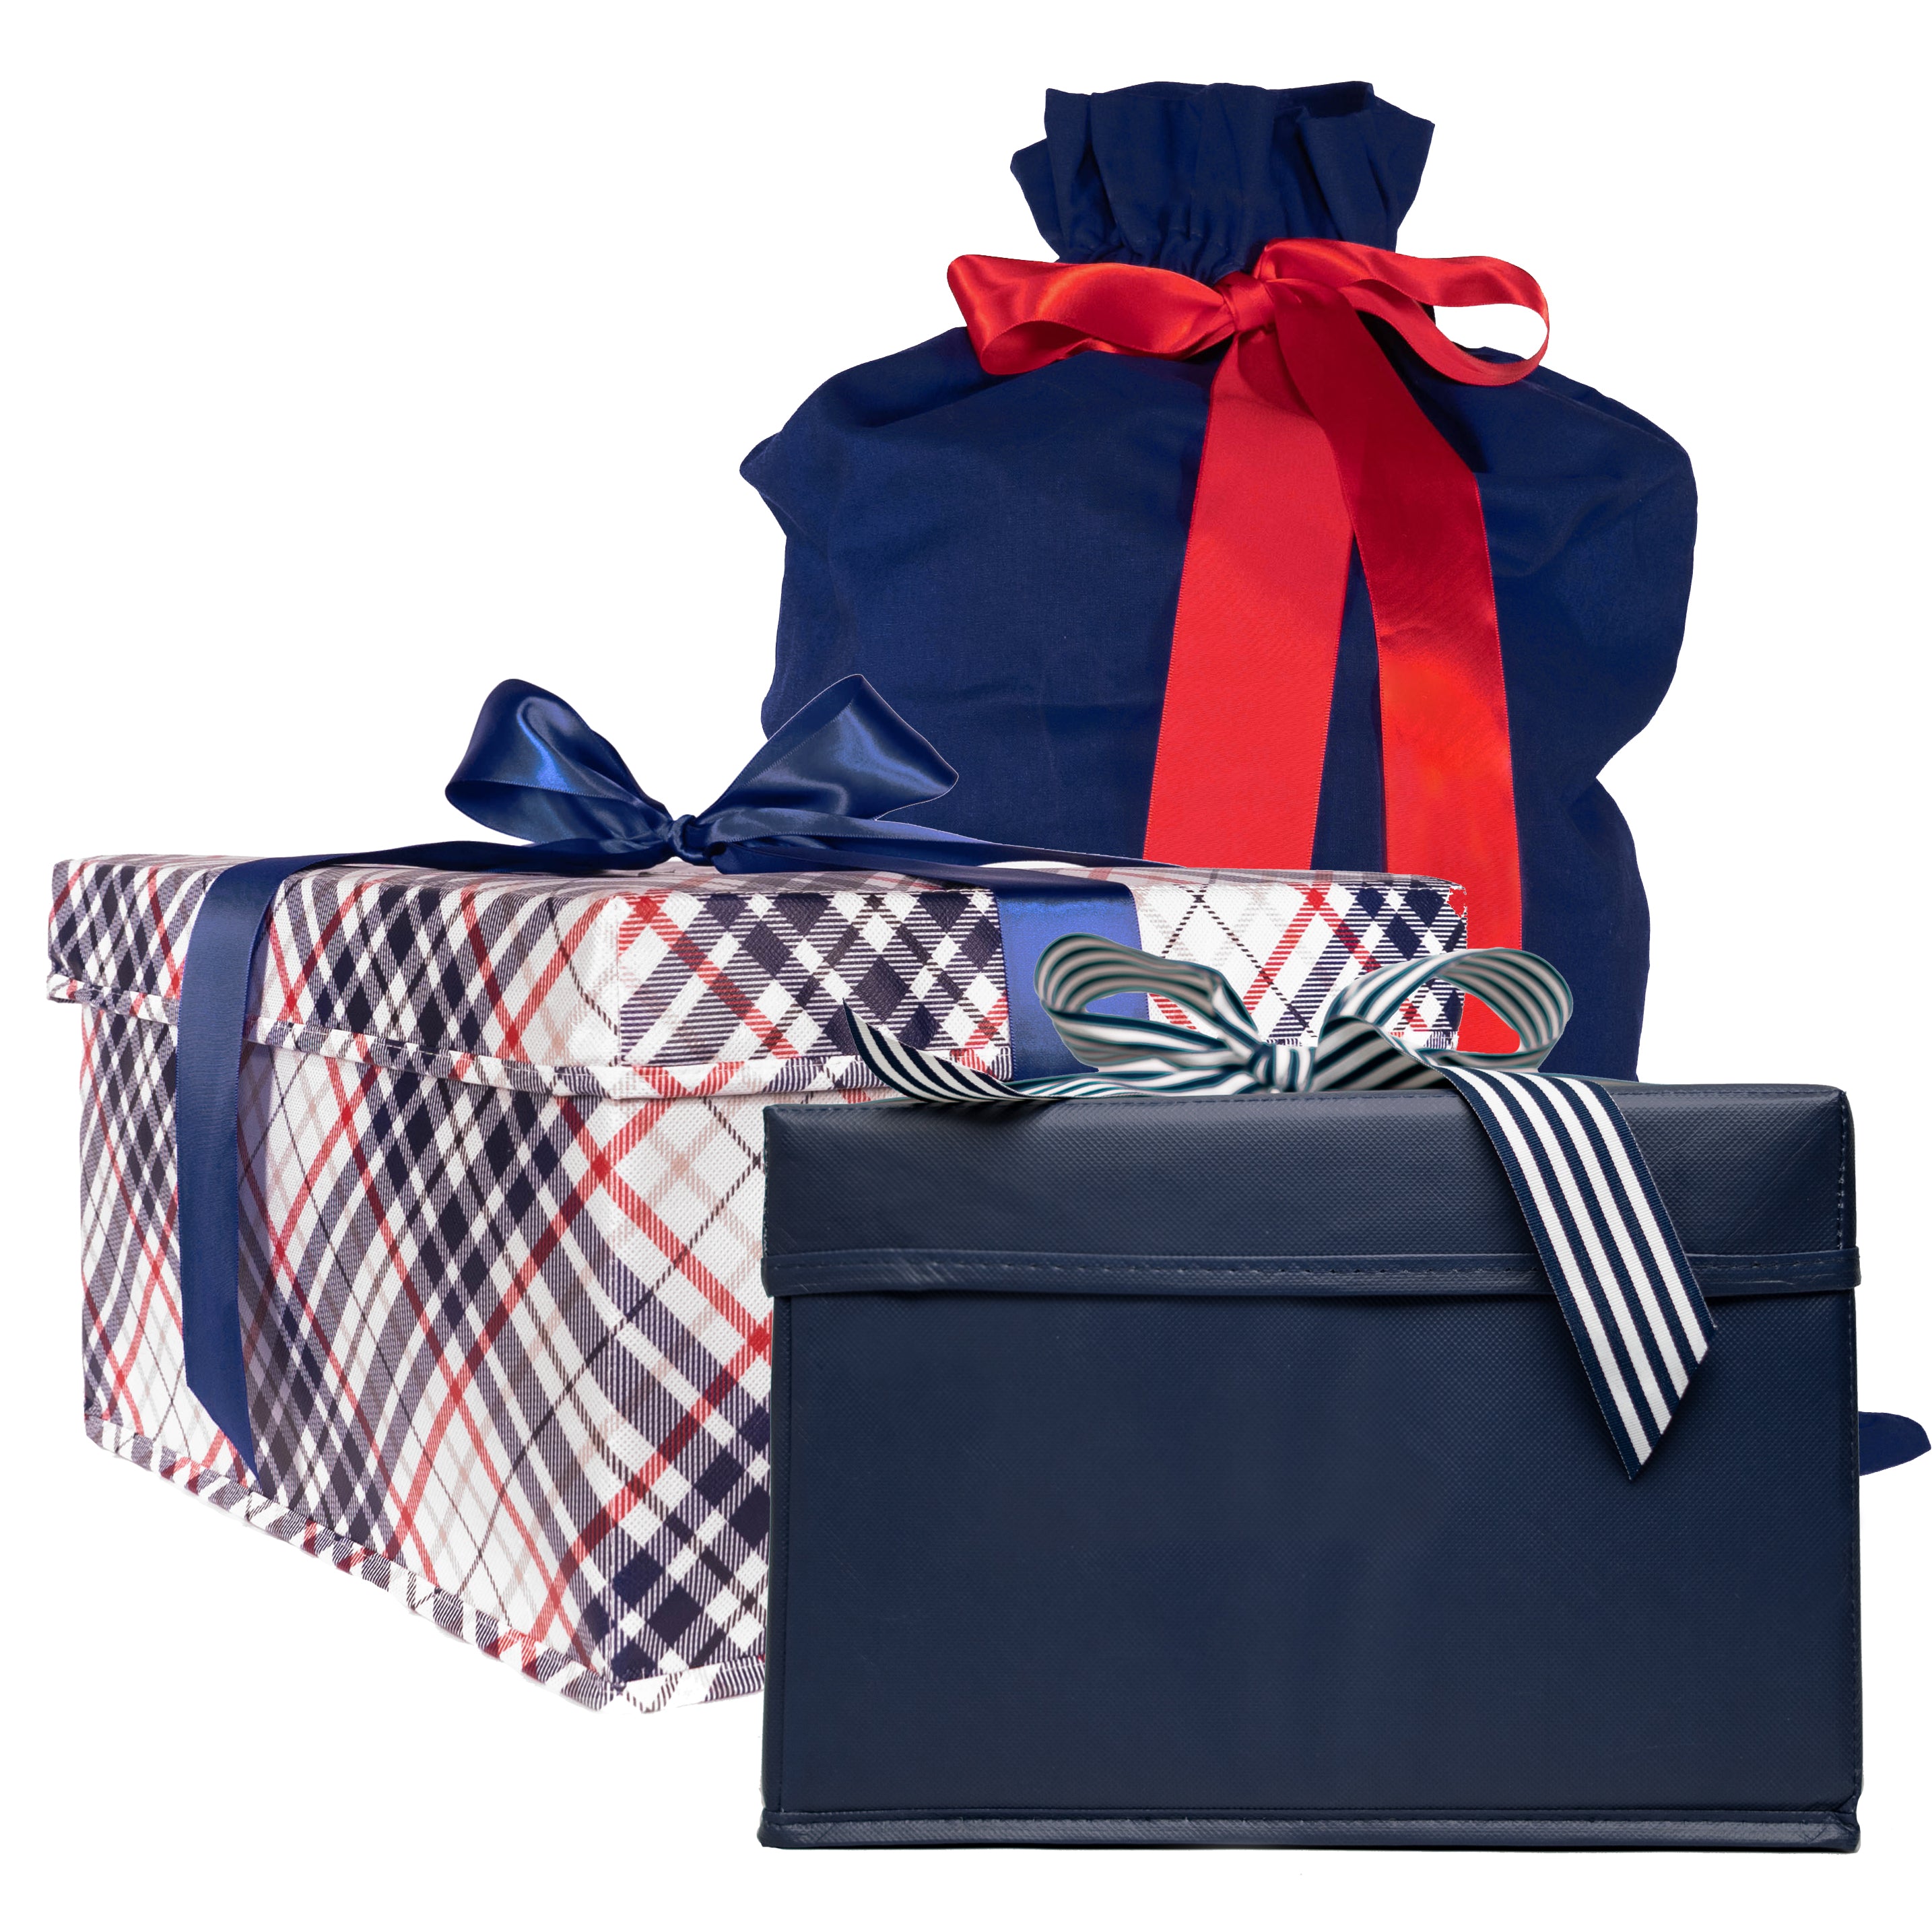 Classic Folding Box / 15 liters / navy-blue only 26,95 €